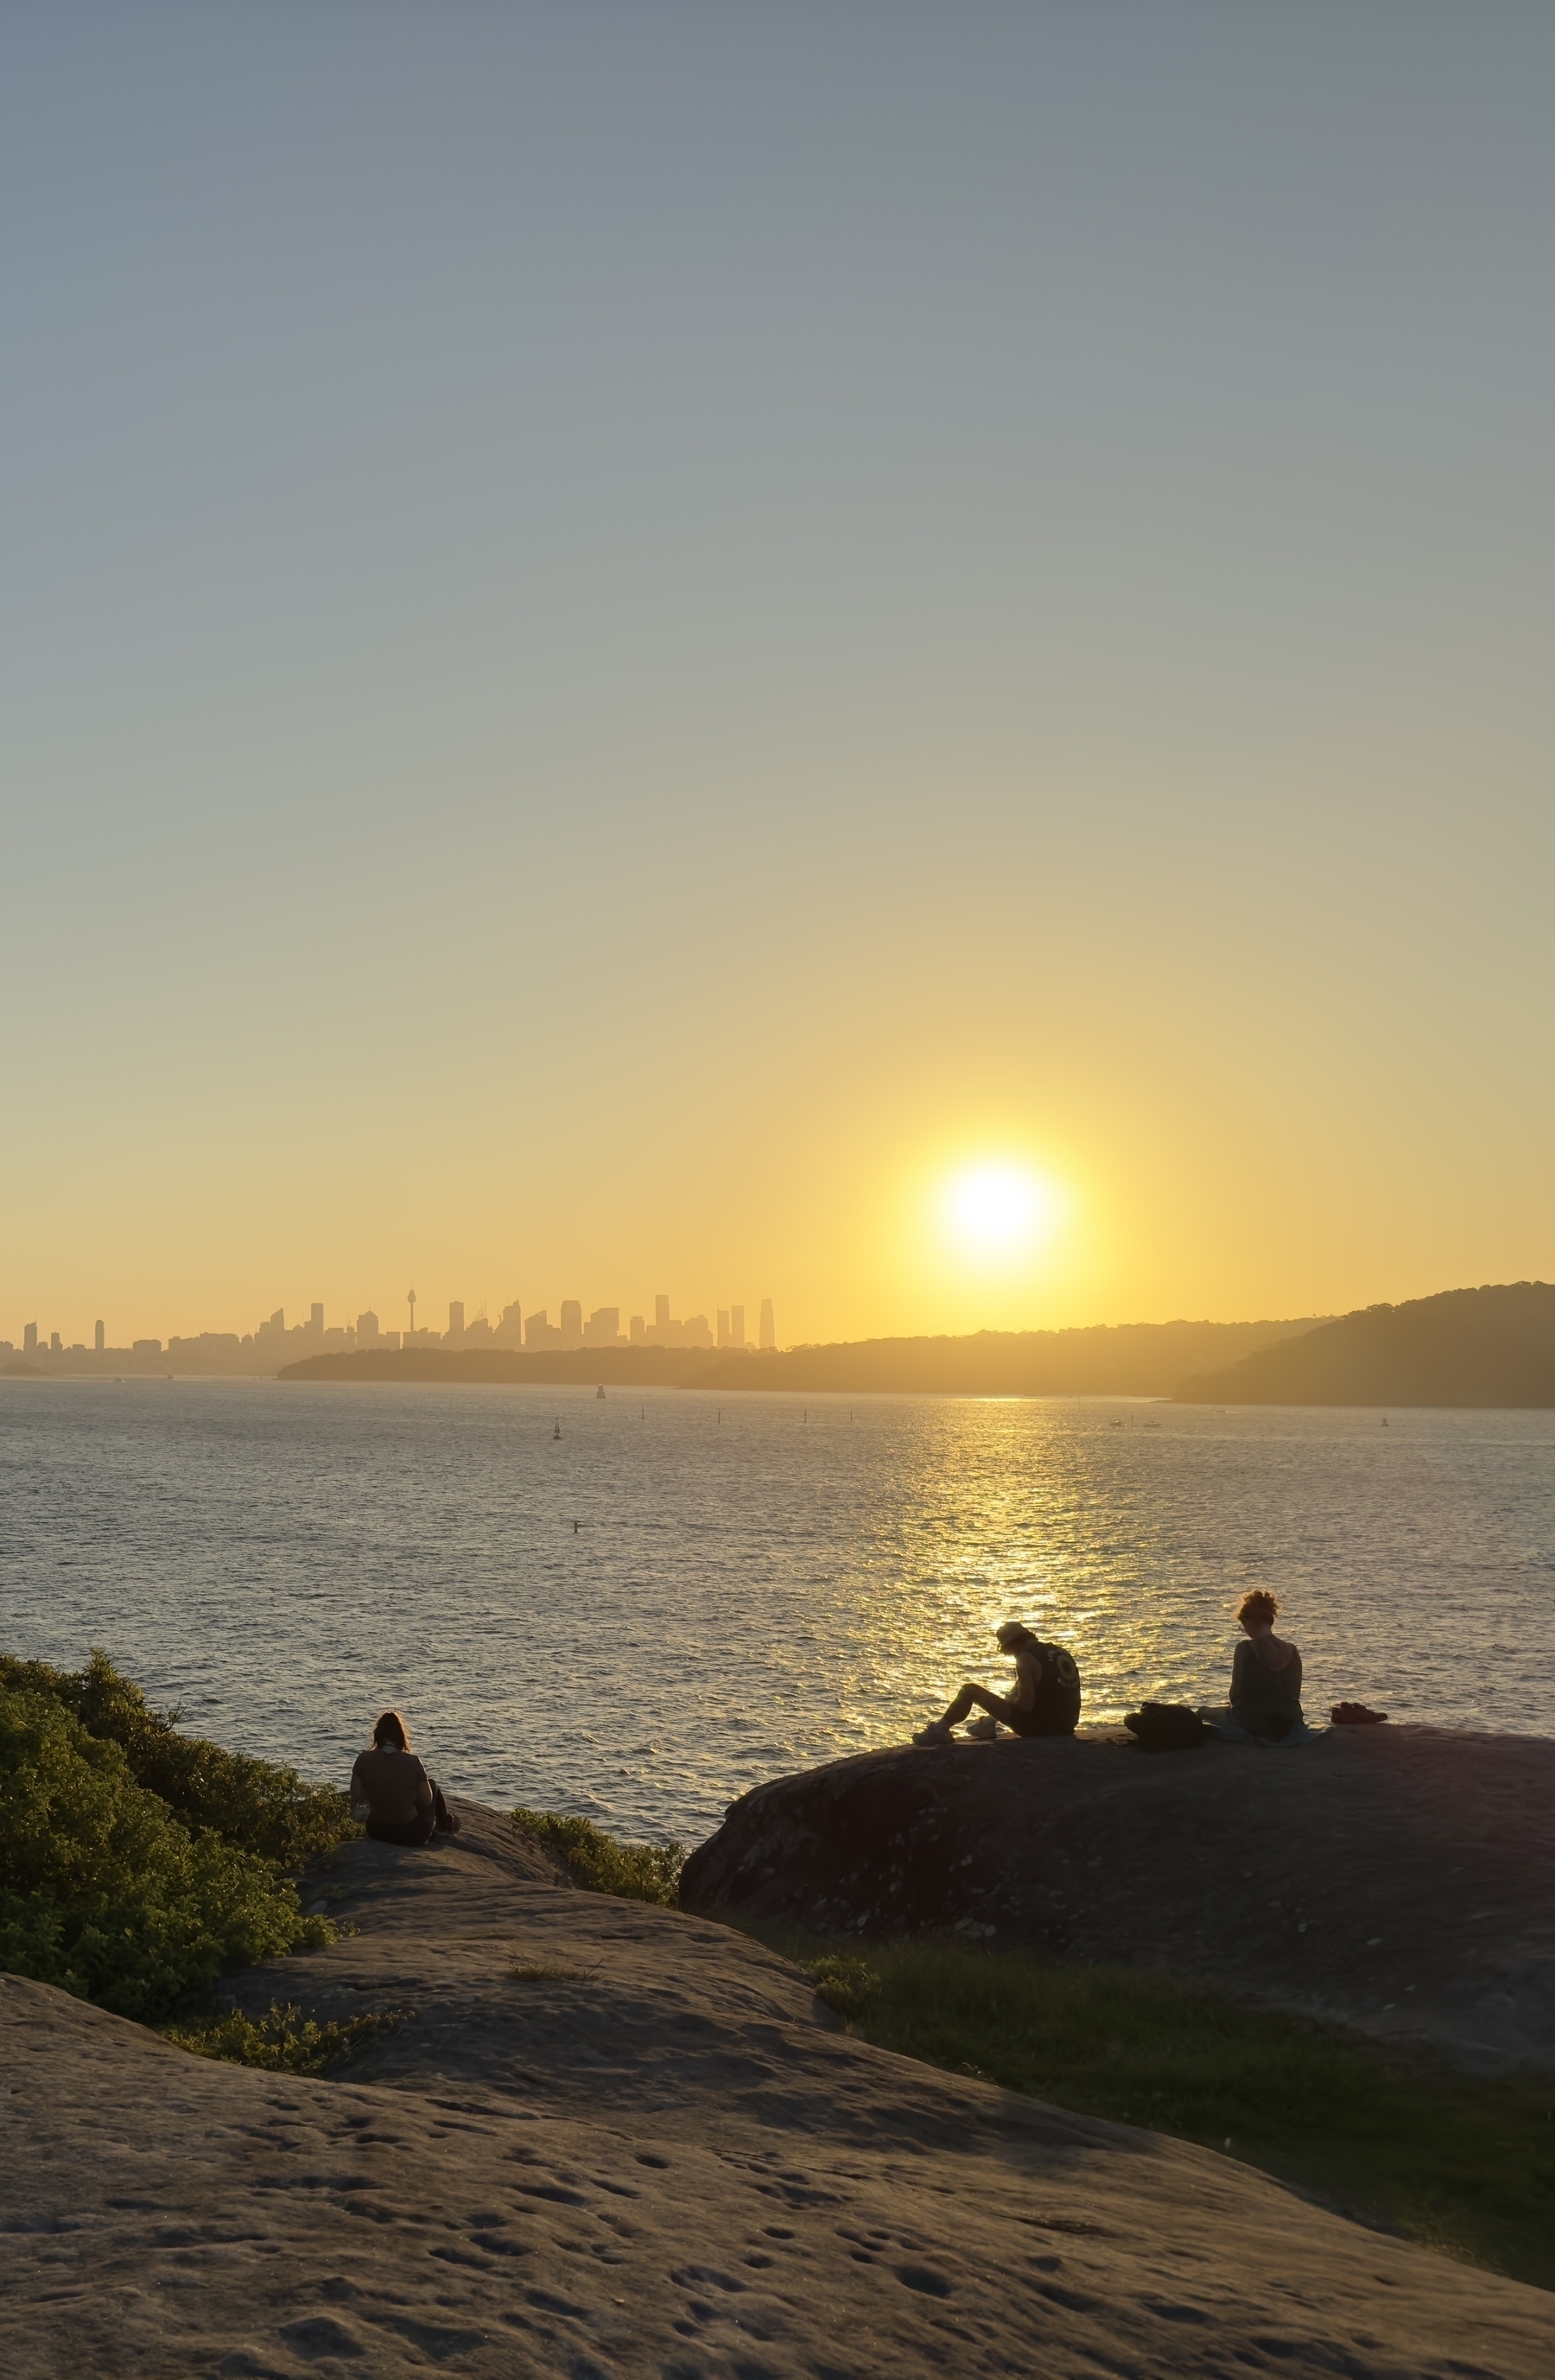 People sat on rocks watching the sun set over the Sydney skyline and water.